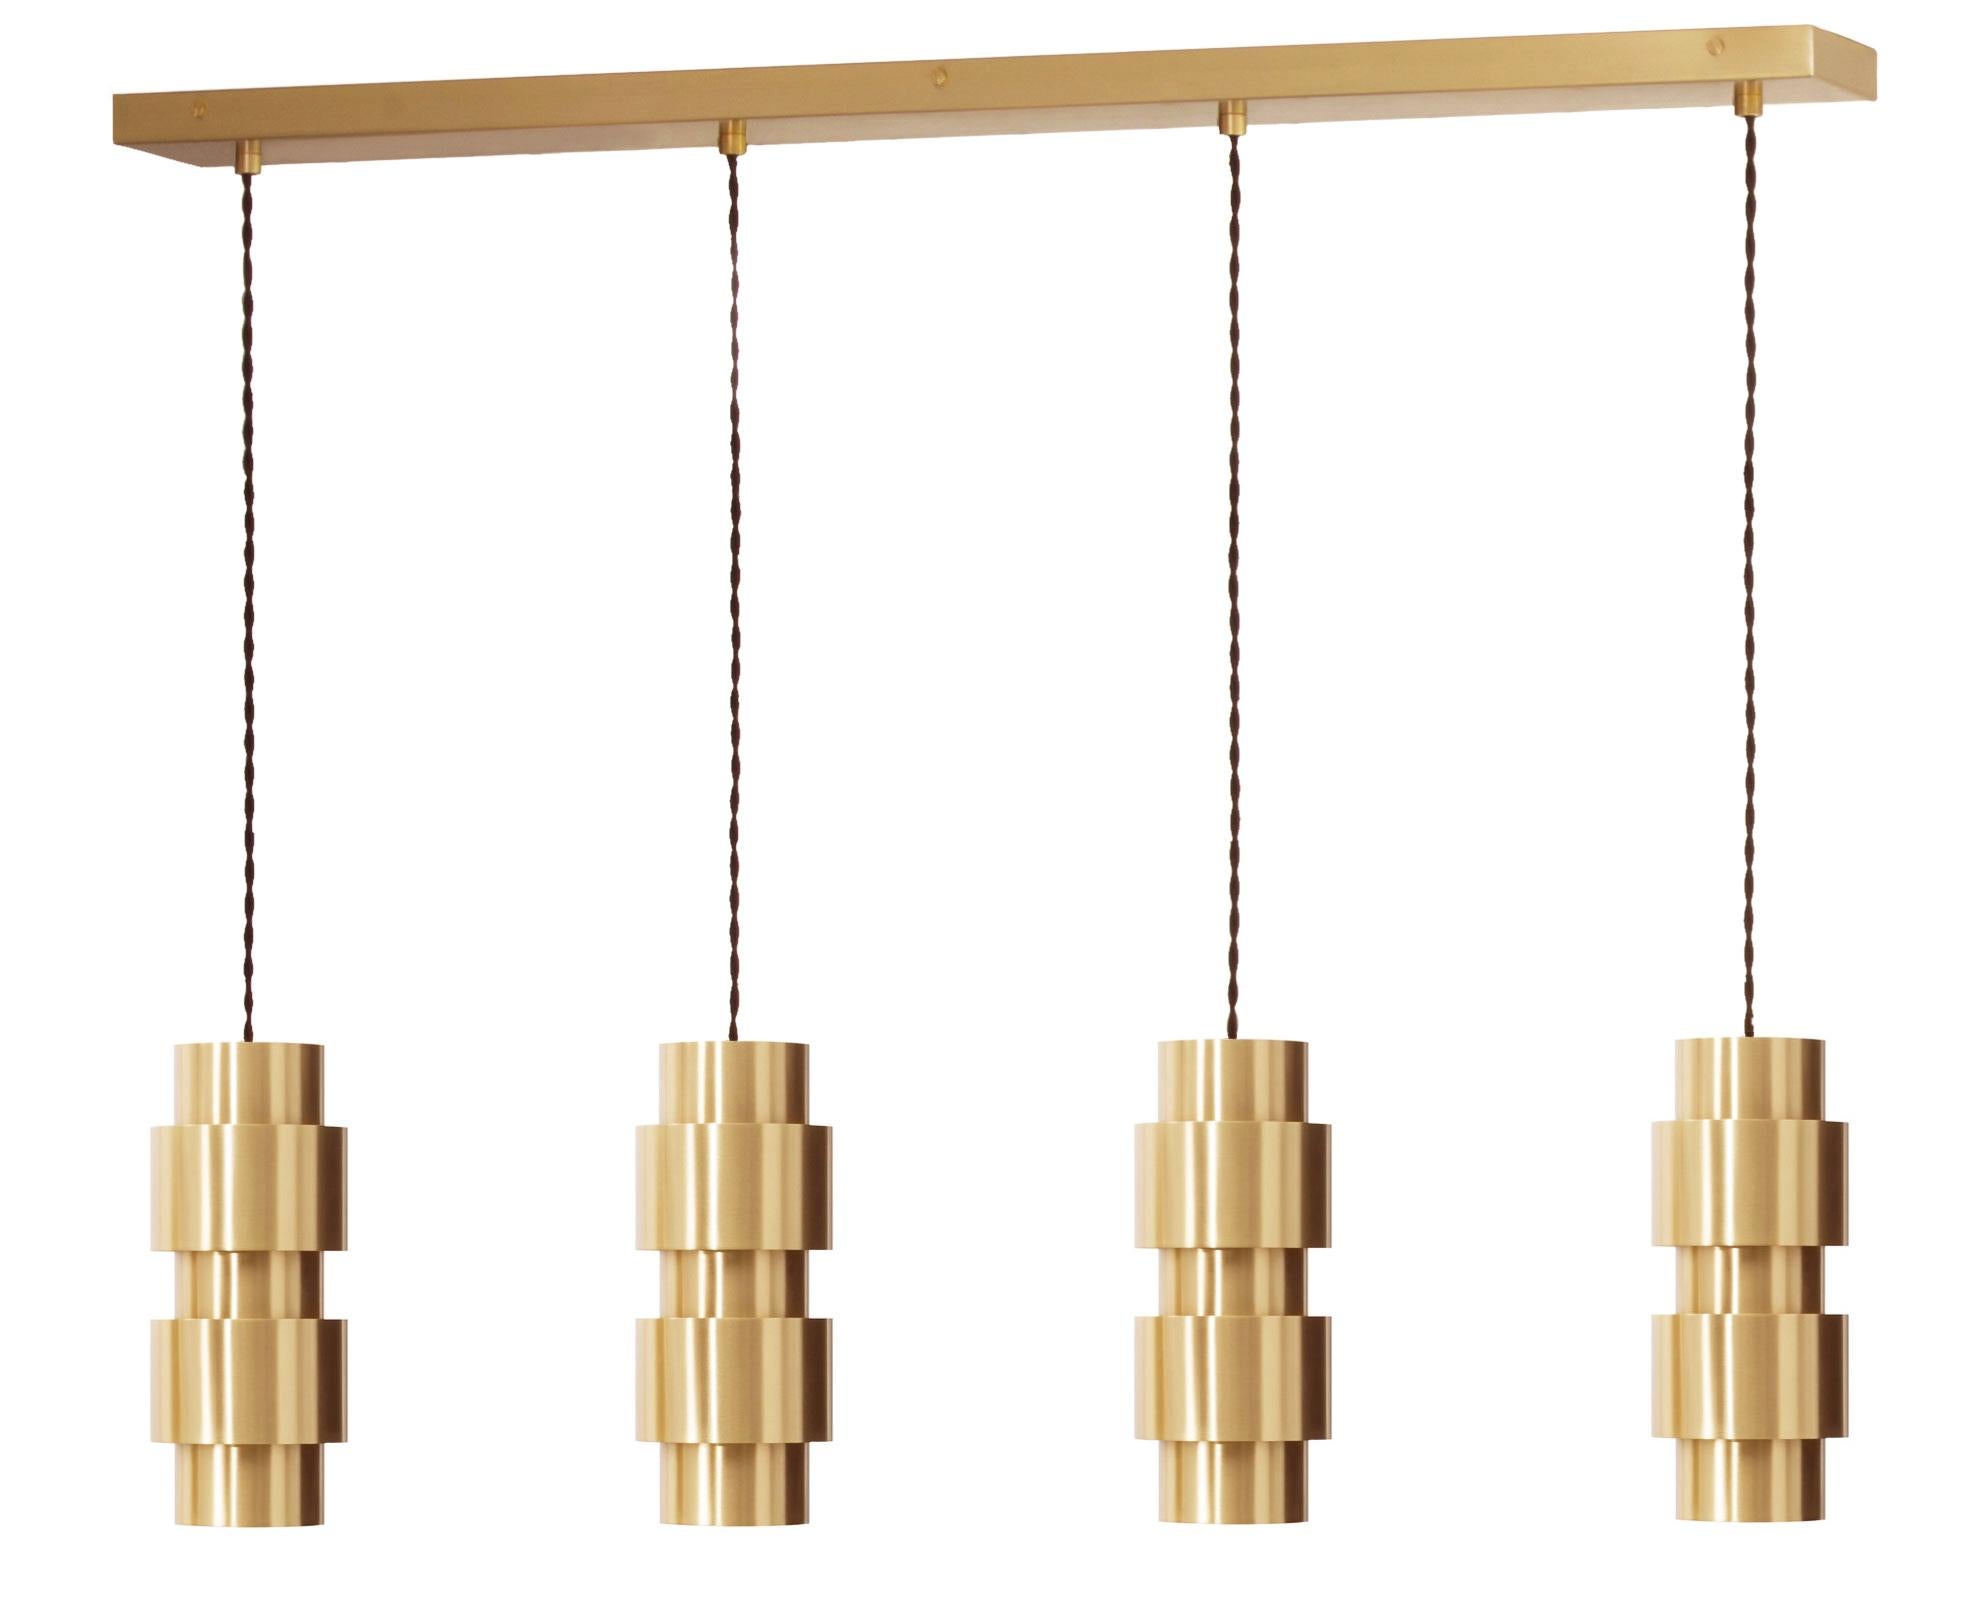 Ring Cluster Long 4 Pendants by CTO Lighting.
Materials: satin brass with black silk braided flex.
Also available in bronze and satin brass with black silk braided flex.
Dimensions: H 24 x W 90 cm.
Weight 10kg approx.
Other sizes are available.

All